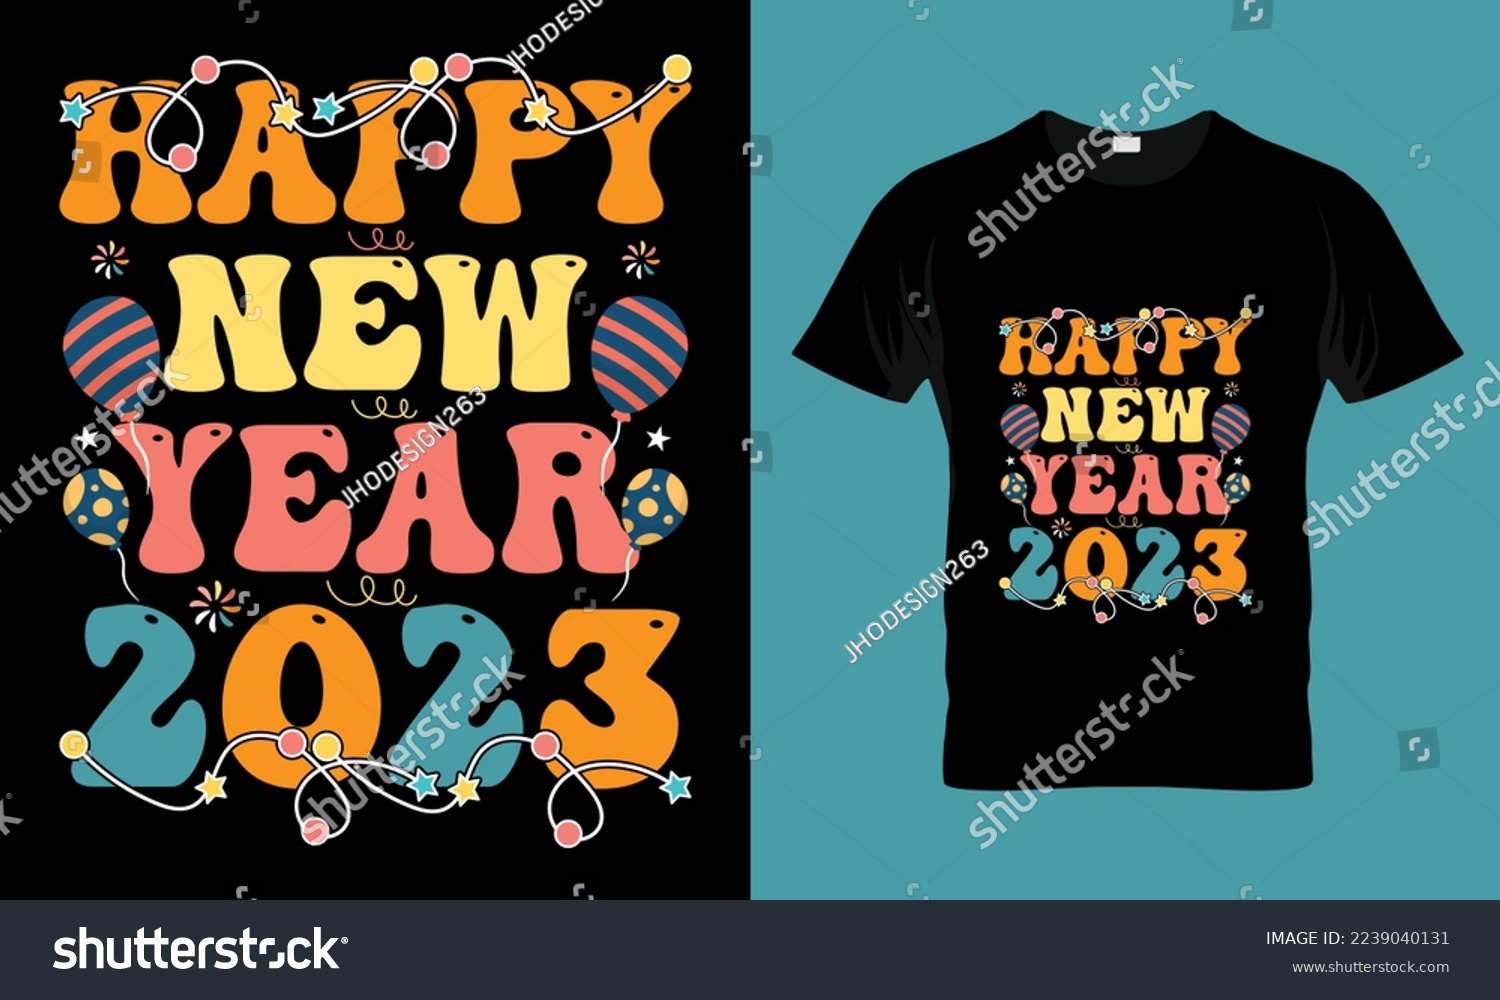 SVG of happy new year 2023 design template vector and typography.
Ready for t-shirt, mug,gift and other printing,2023 svg design,New Year Stickers quotes t shirt designs
Happy new year svg.
 svg